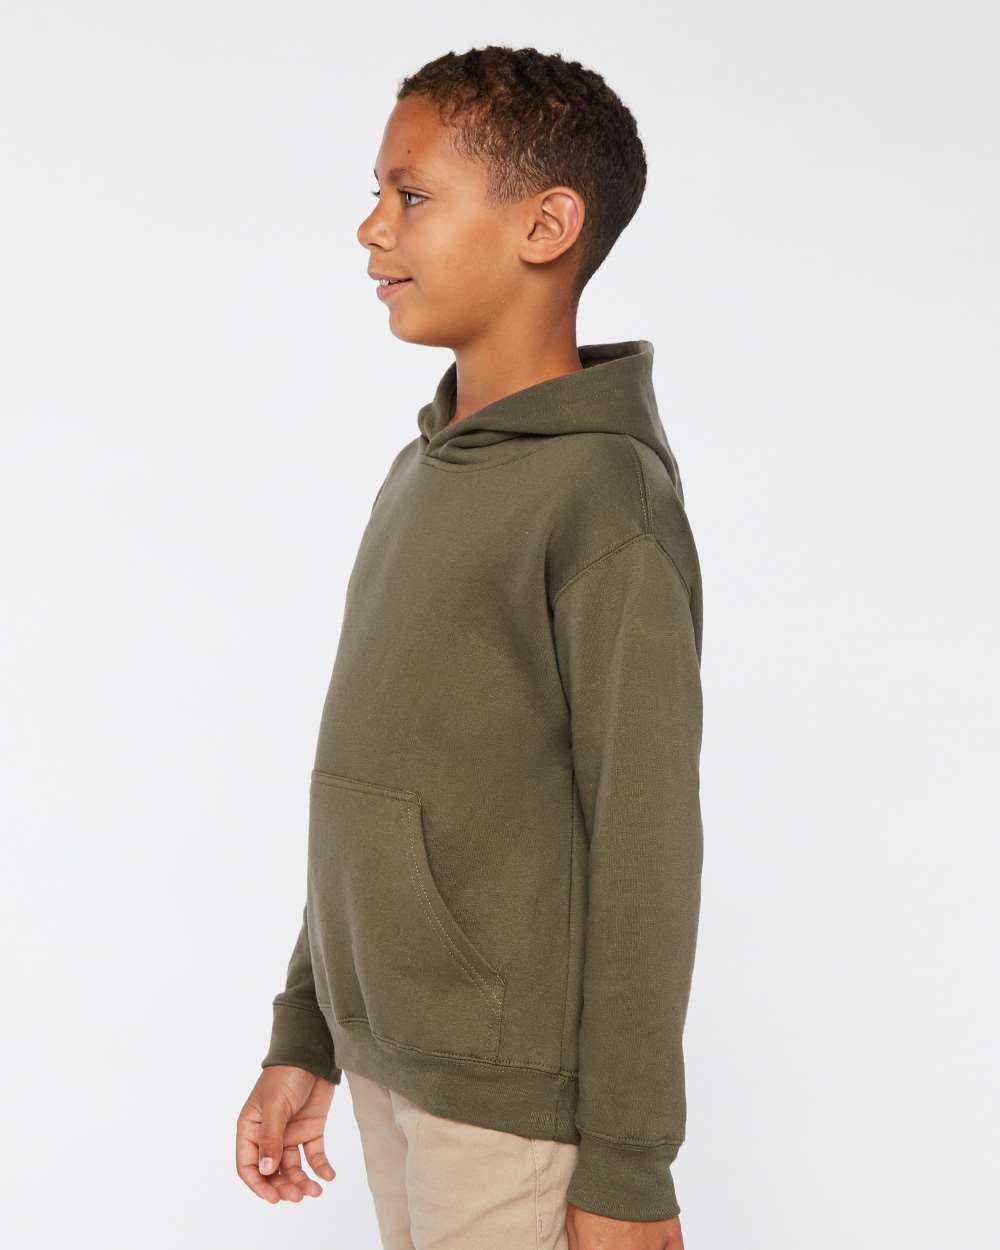 Lat 2296 Youth Pullover Hooded Sweatshirt - Military Green - HIT a Double - 1